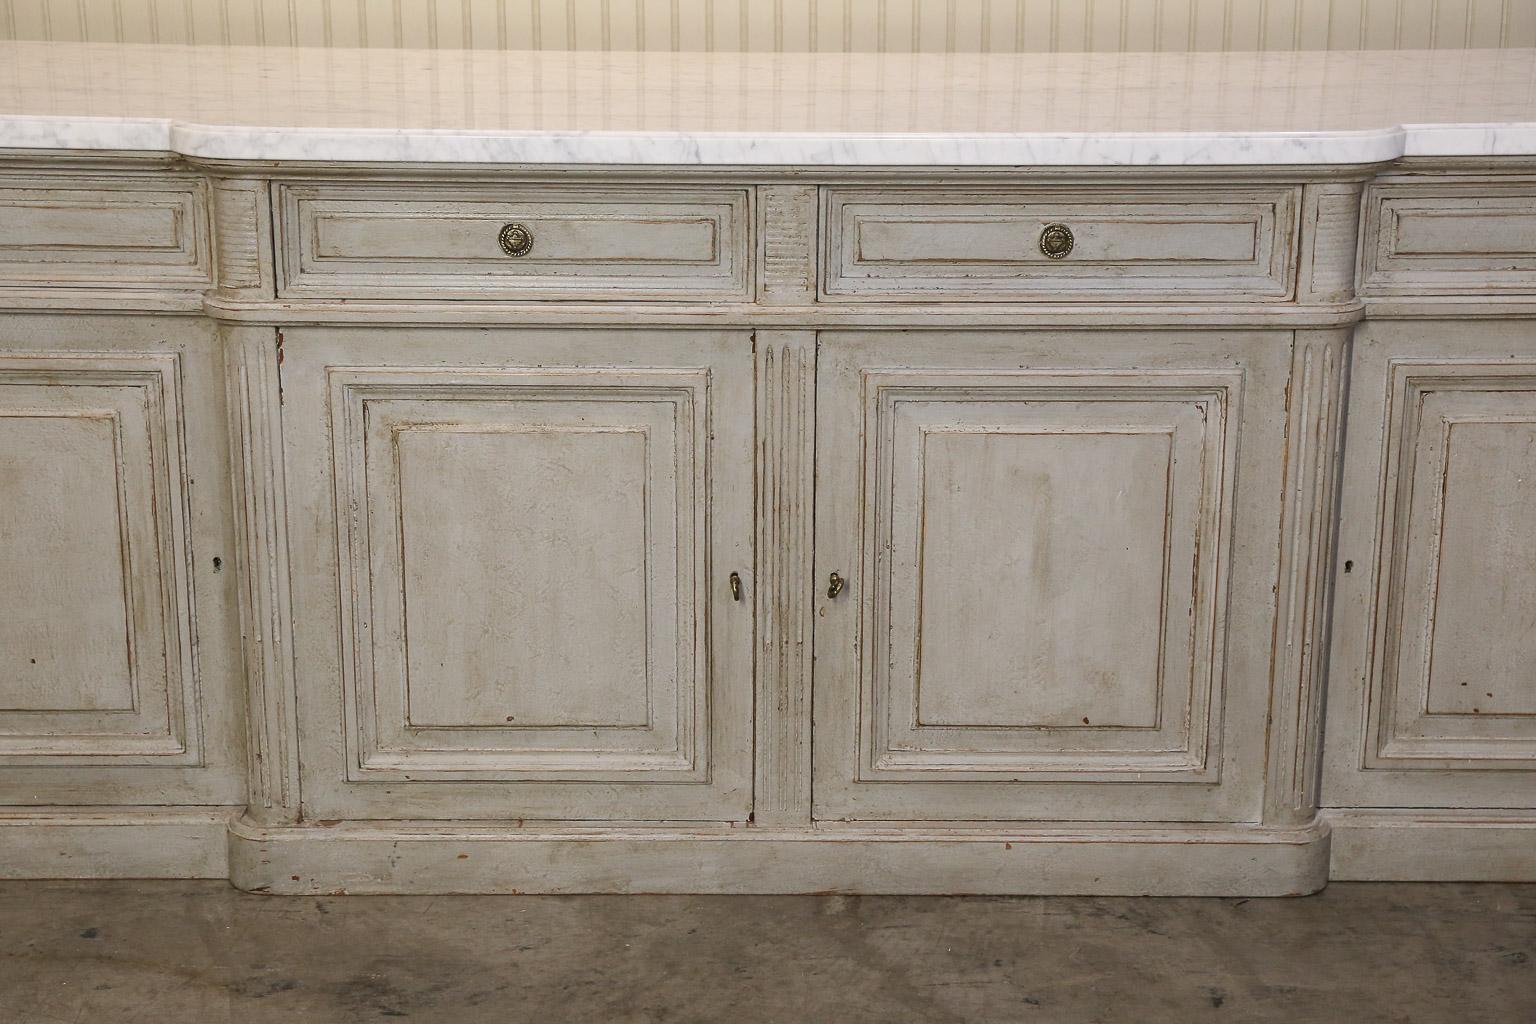 Very Large Louis XVI-style walnut credenza has been painted a grey wash and topped with a shaped white marble.

Credenza features four paneled drawers and cabinet doors for optimal storage.

Front ends of cabinet are simple columns with the marble